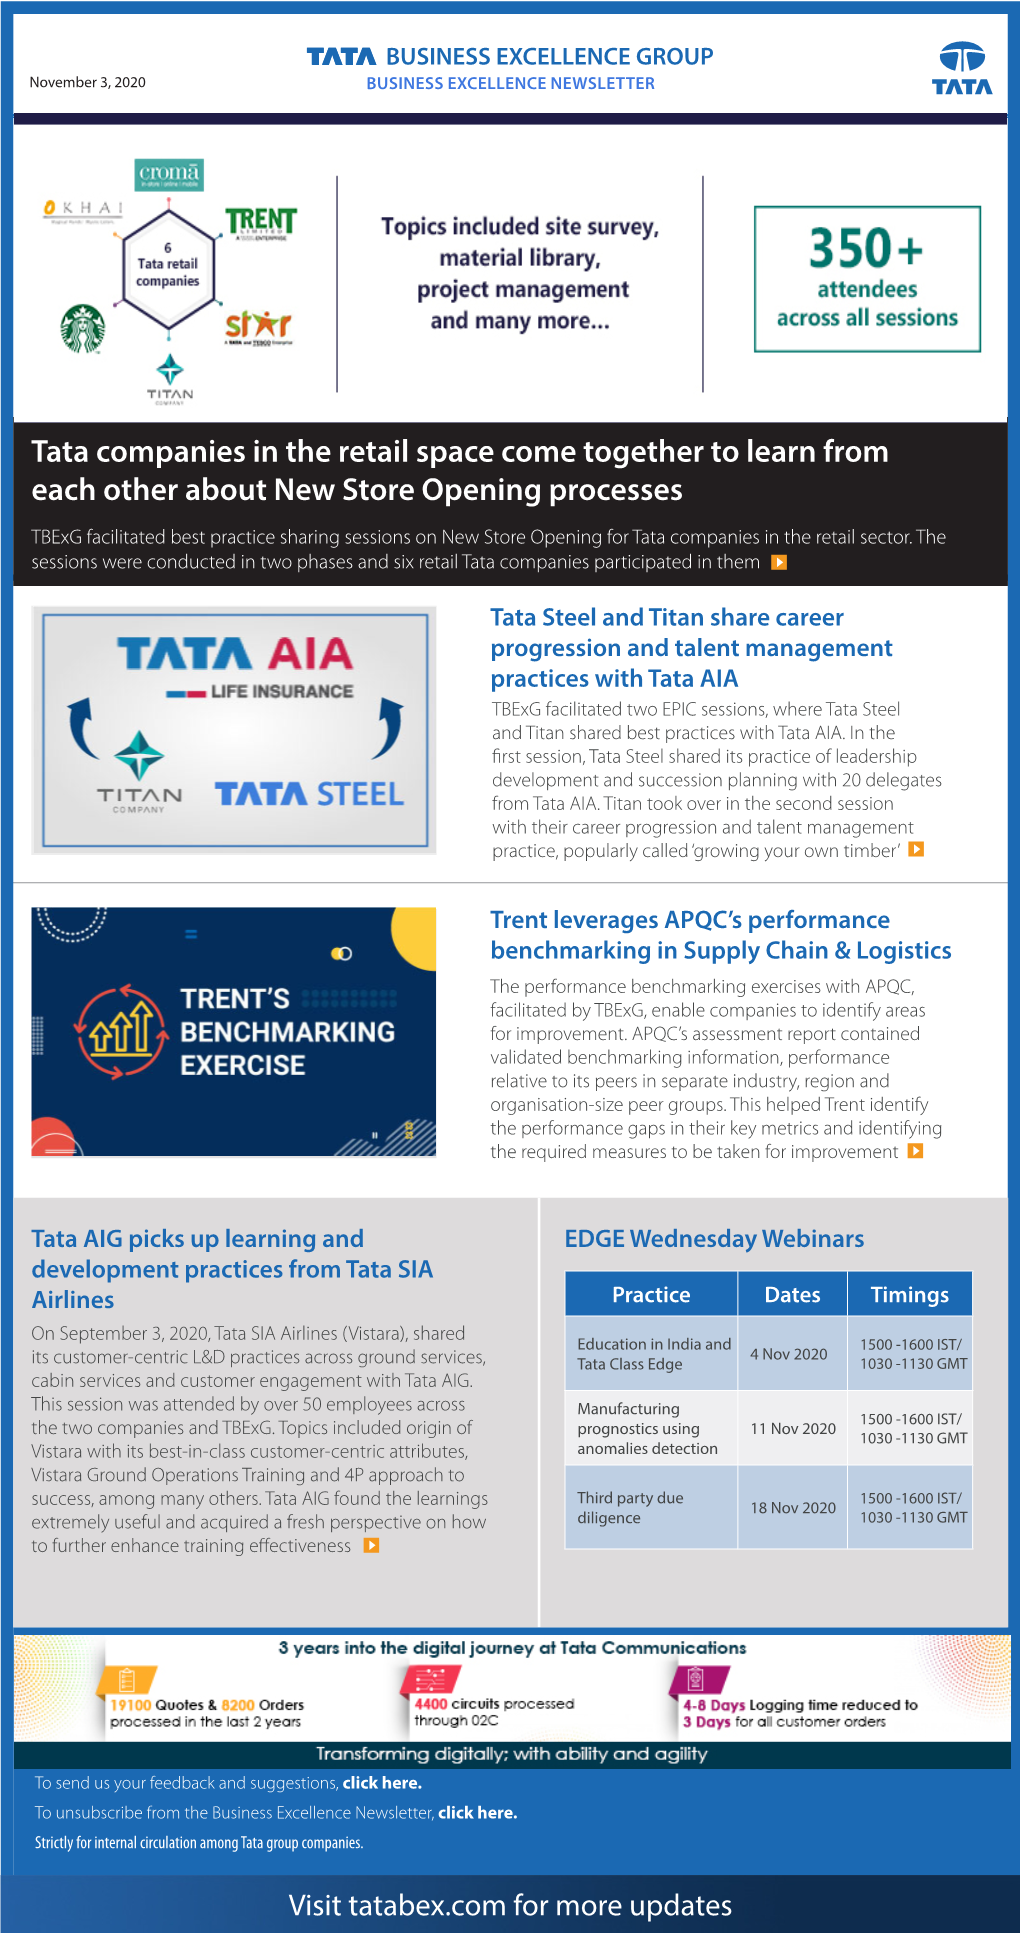 Tata Companies in the Retail Space Come Together to Learn from Each